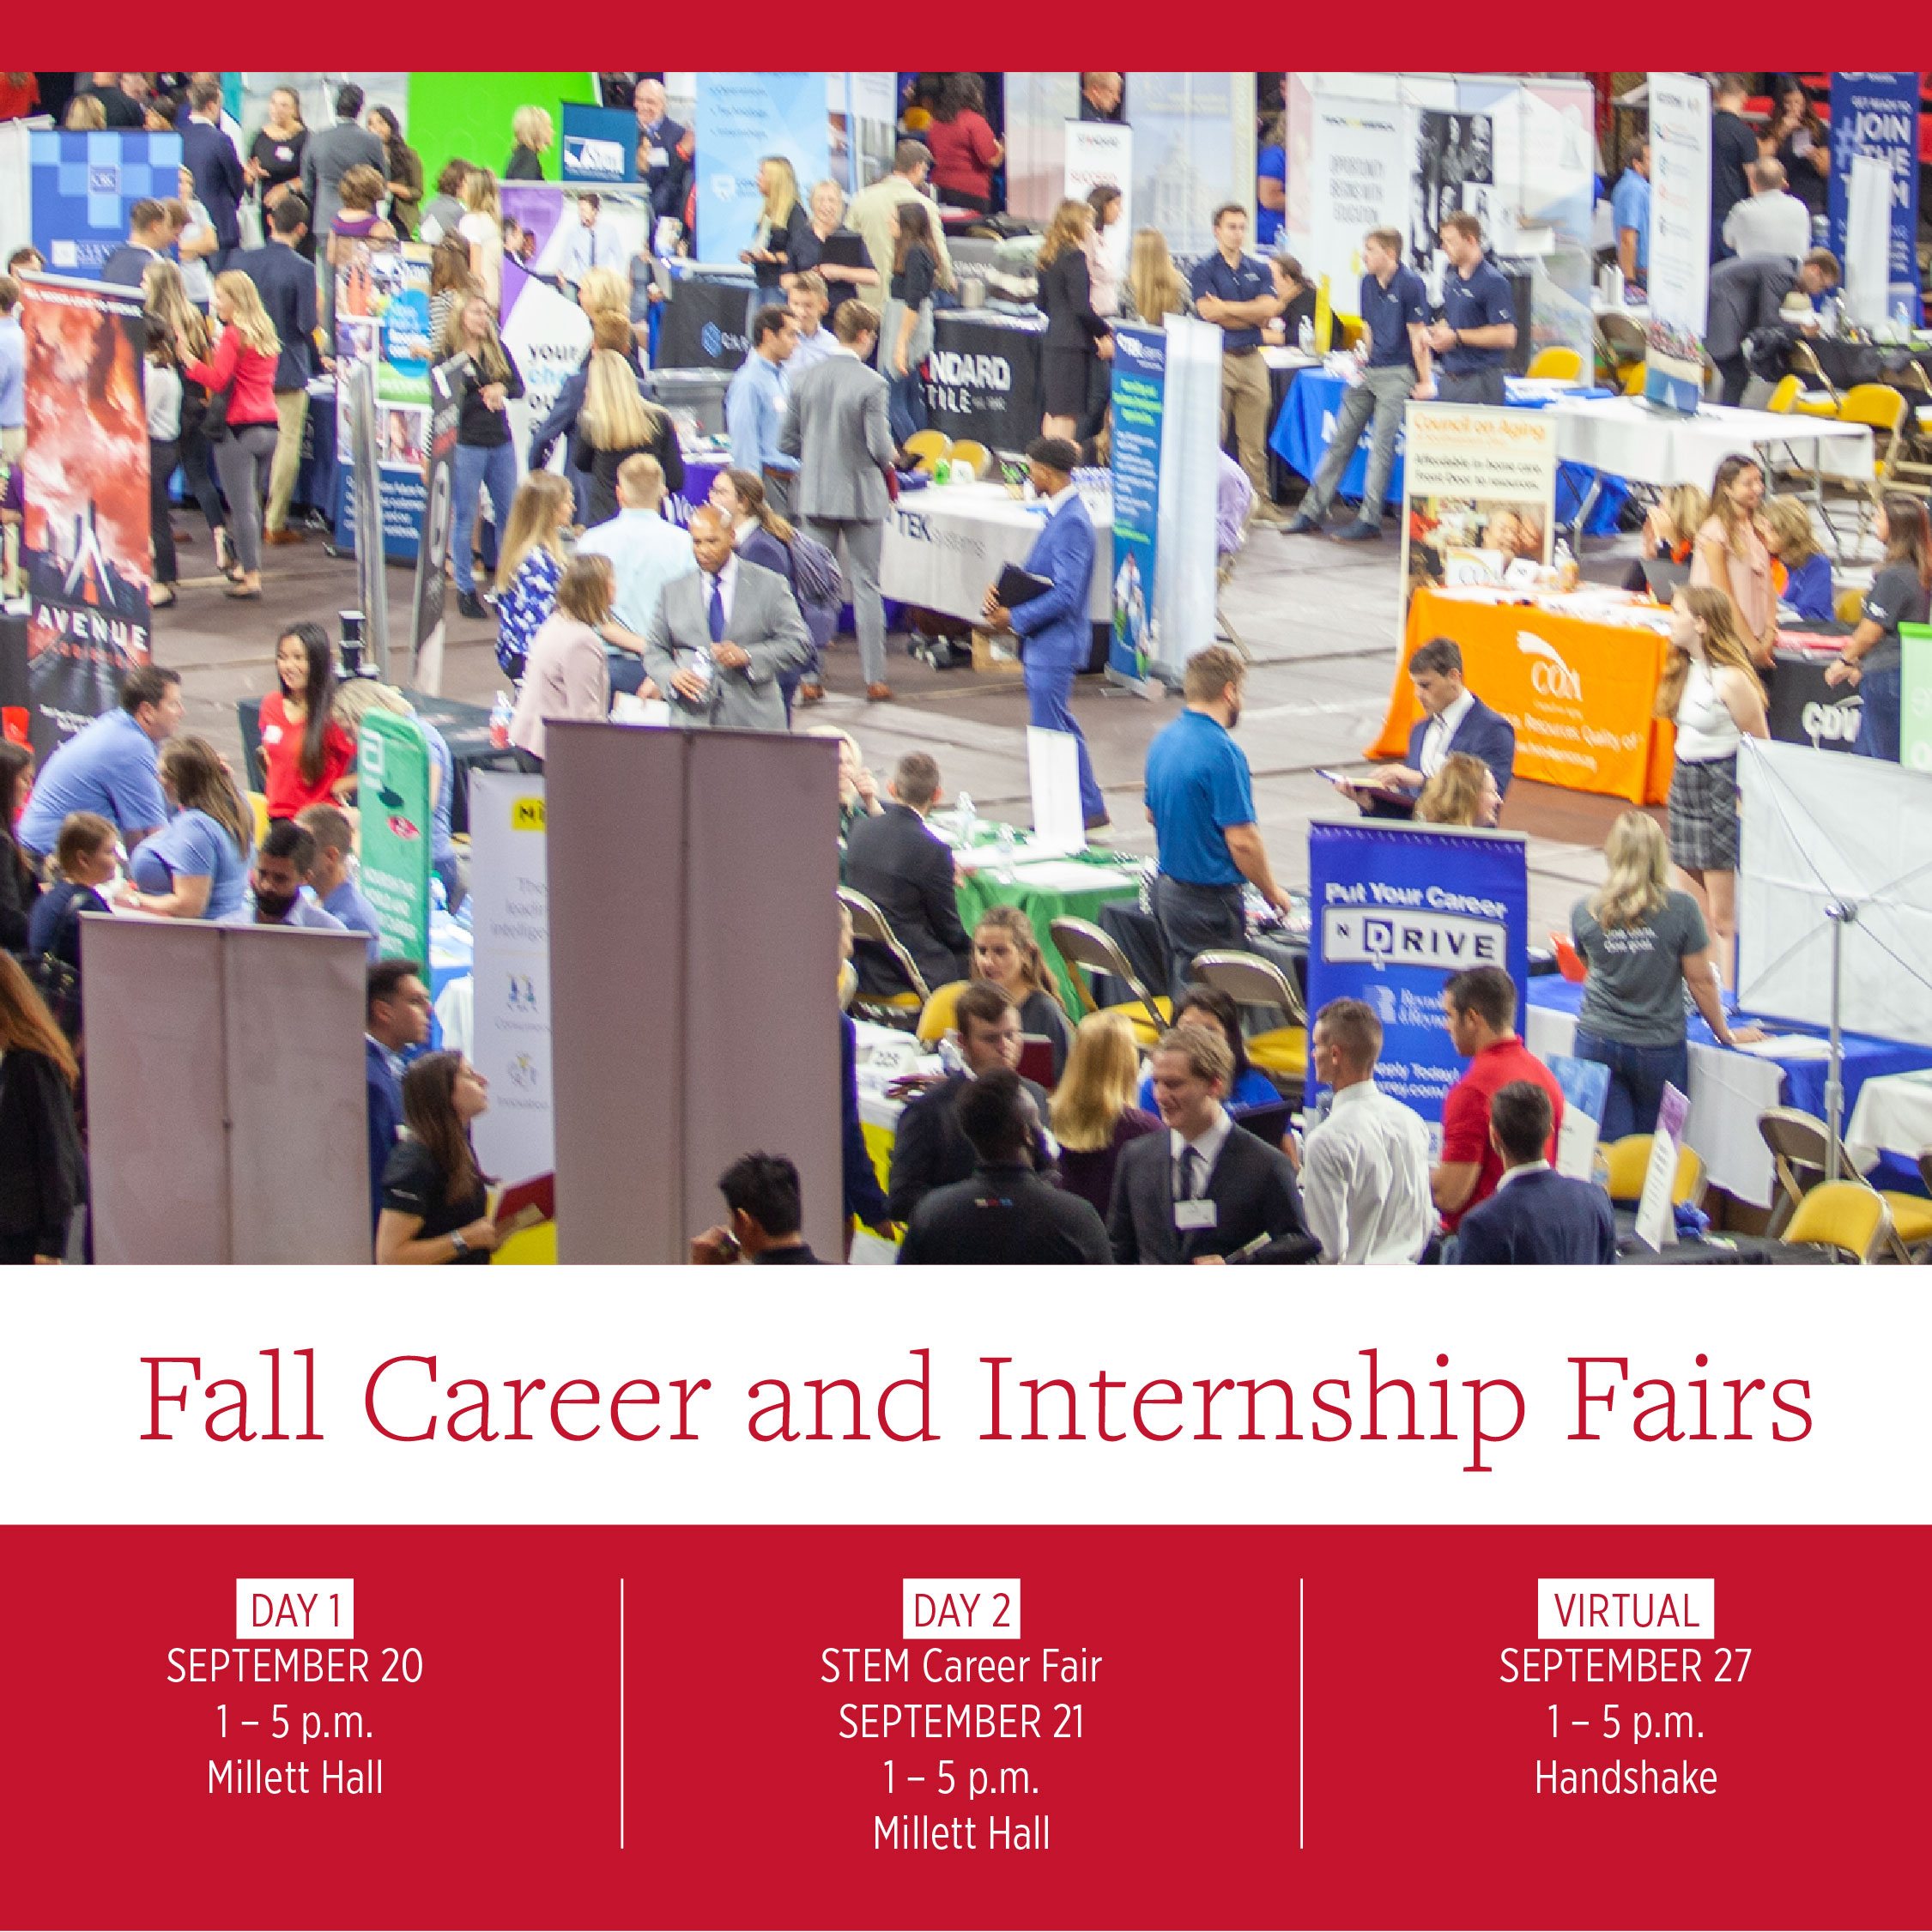  Photo of the Fall Career Fairs held on September 20, 21, and 27